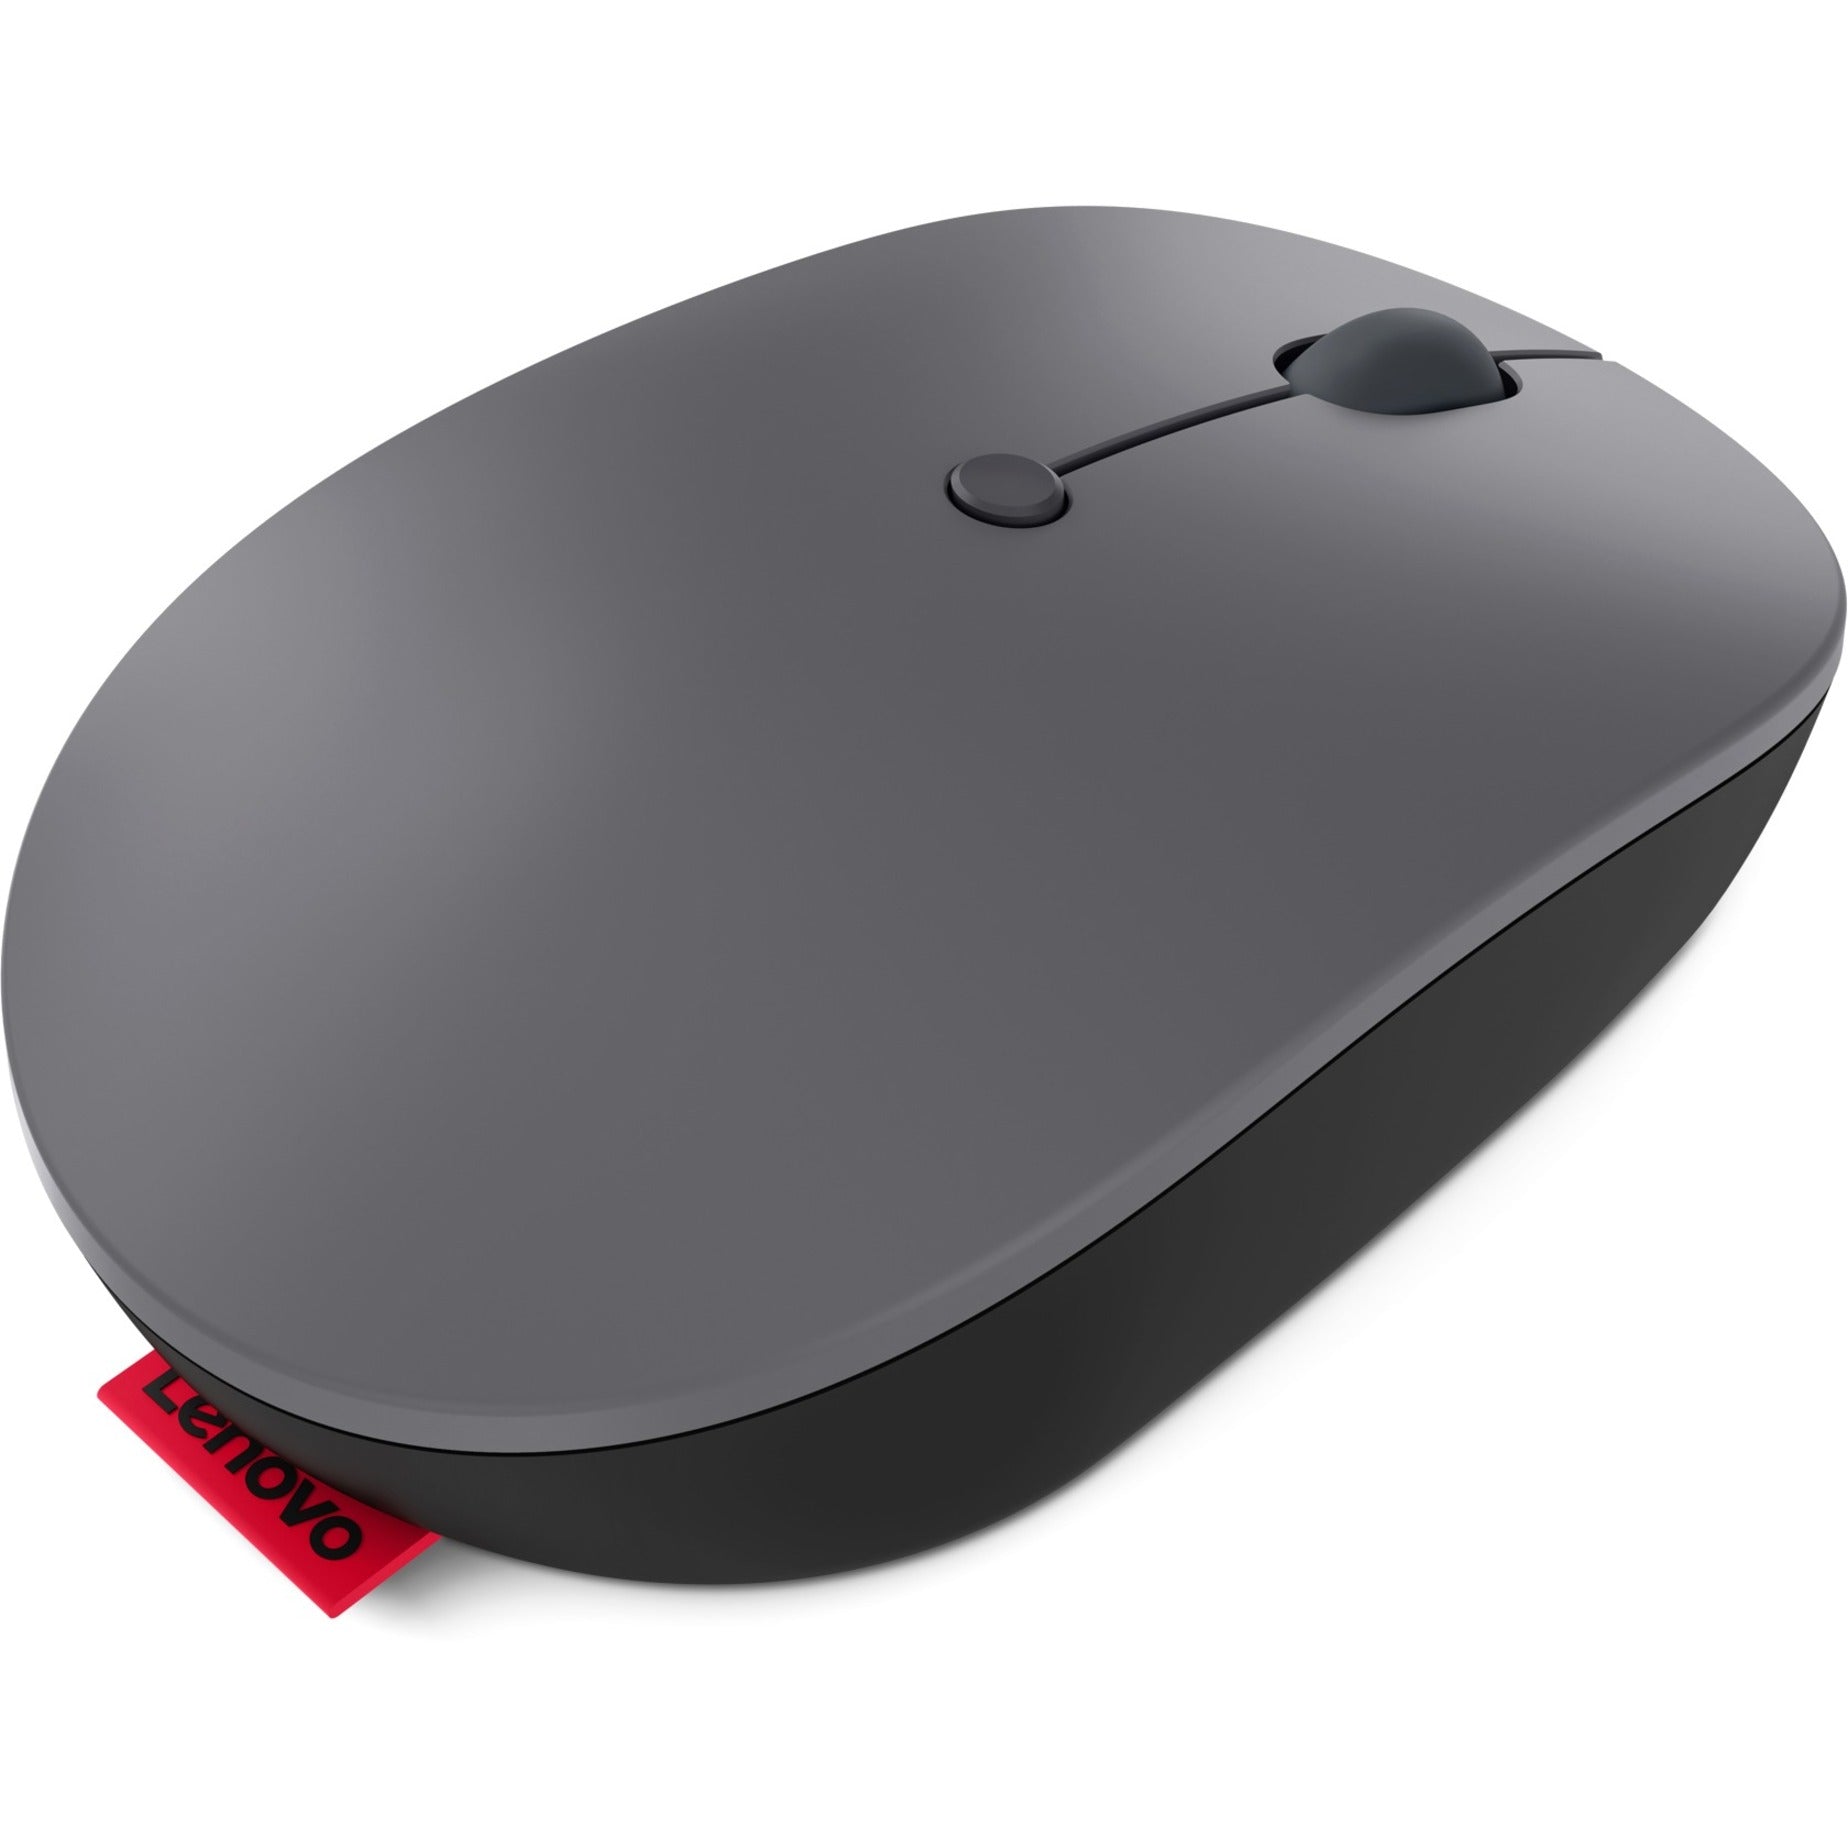 Lenovo 4Y51C21216 Go USB-C Wireless Mouse - Storm Grey, Rechargeable, 4000 dpi, 2.4 GHz